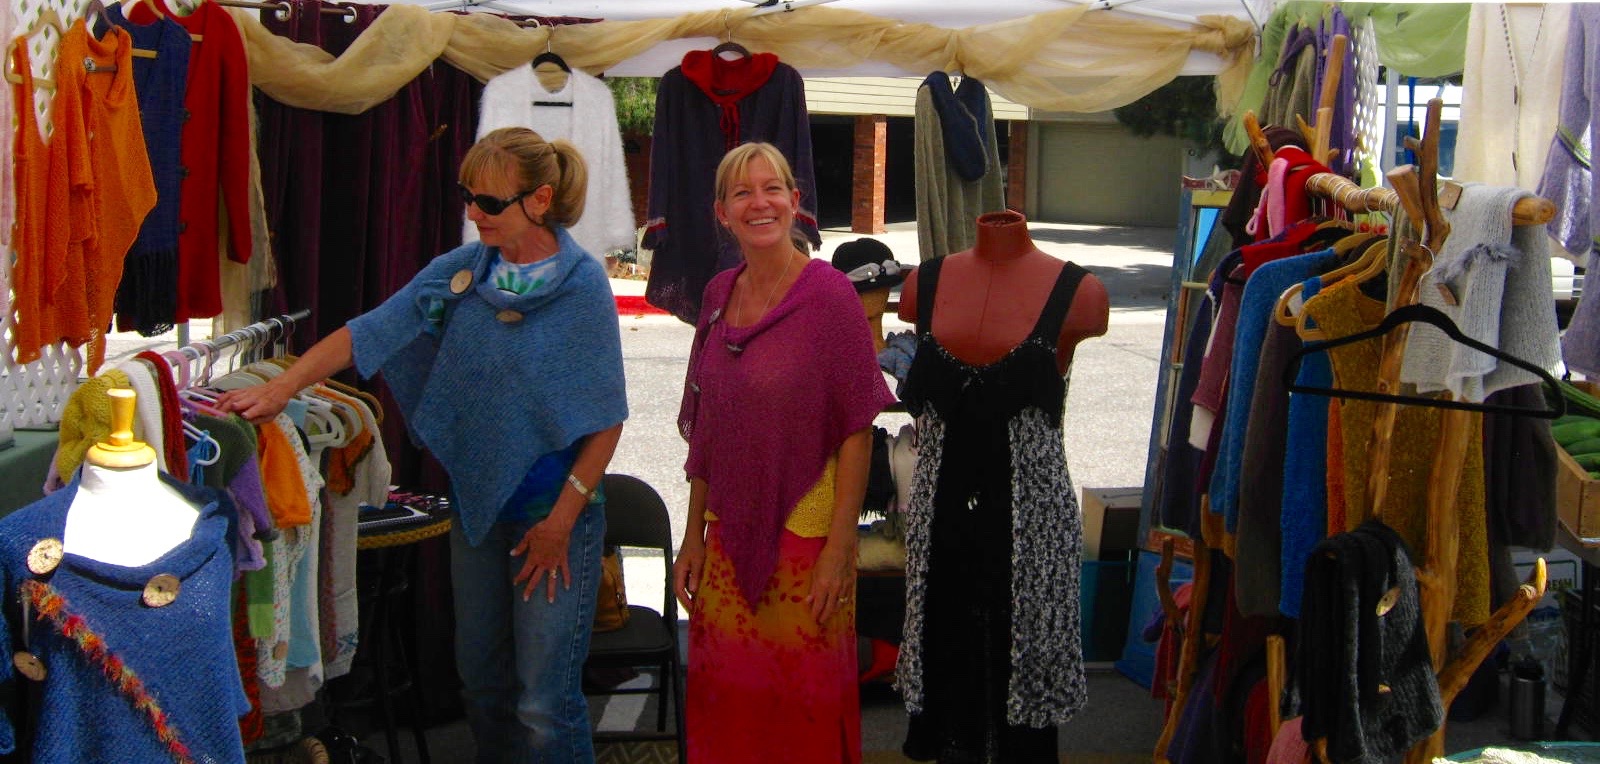 Sweater Jeanie (aka Jeanie Norris) designs one-of-a-kind clothing. Photo courtesy of Ruth Putnam Young.